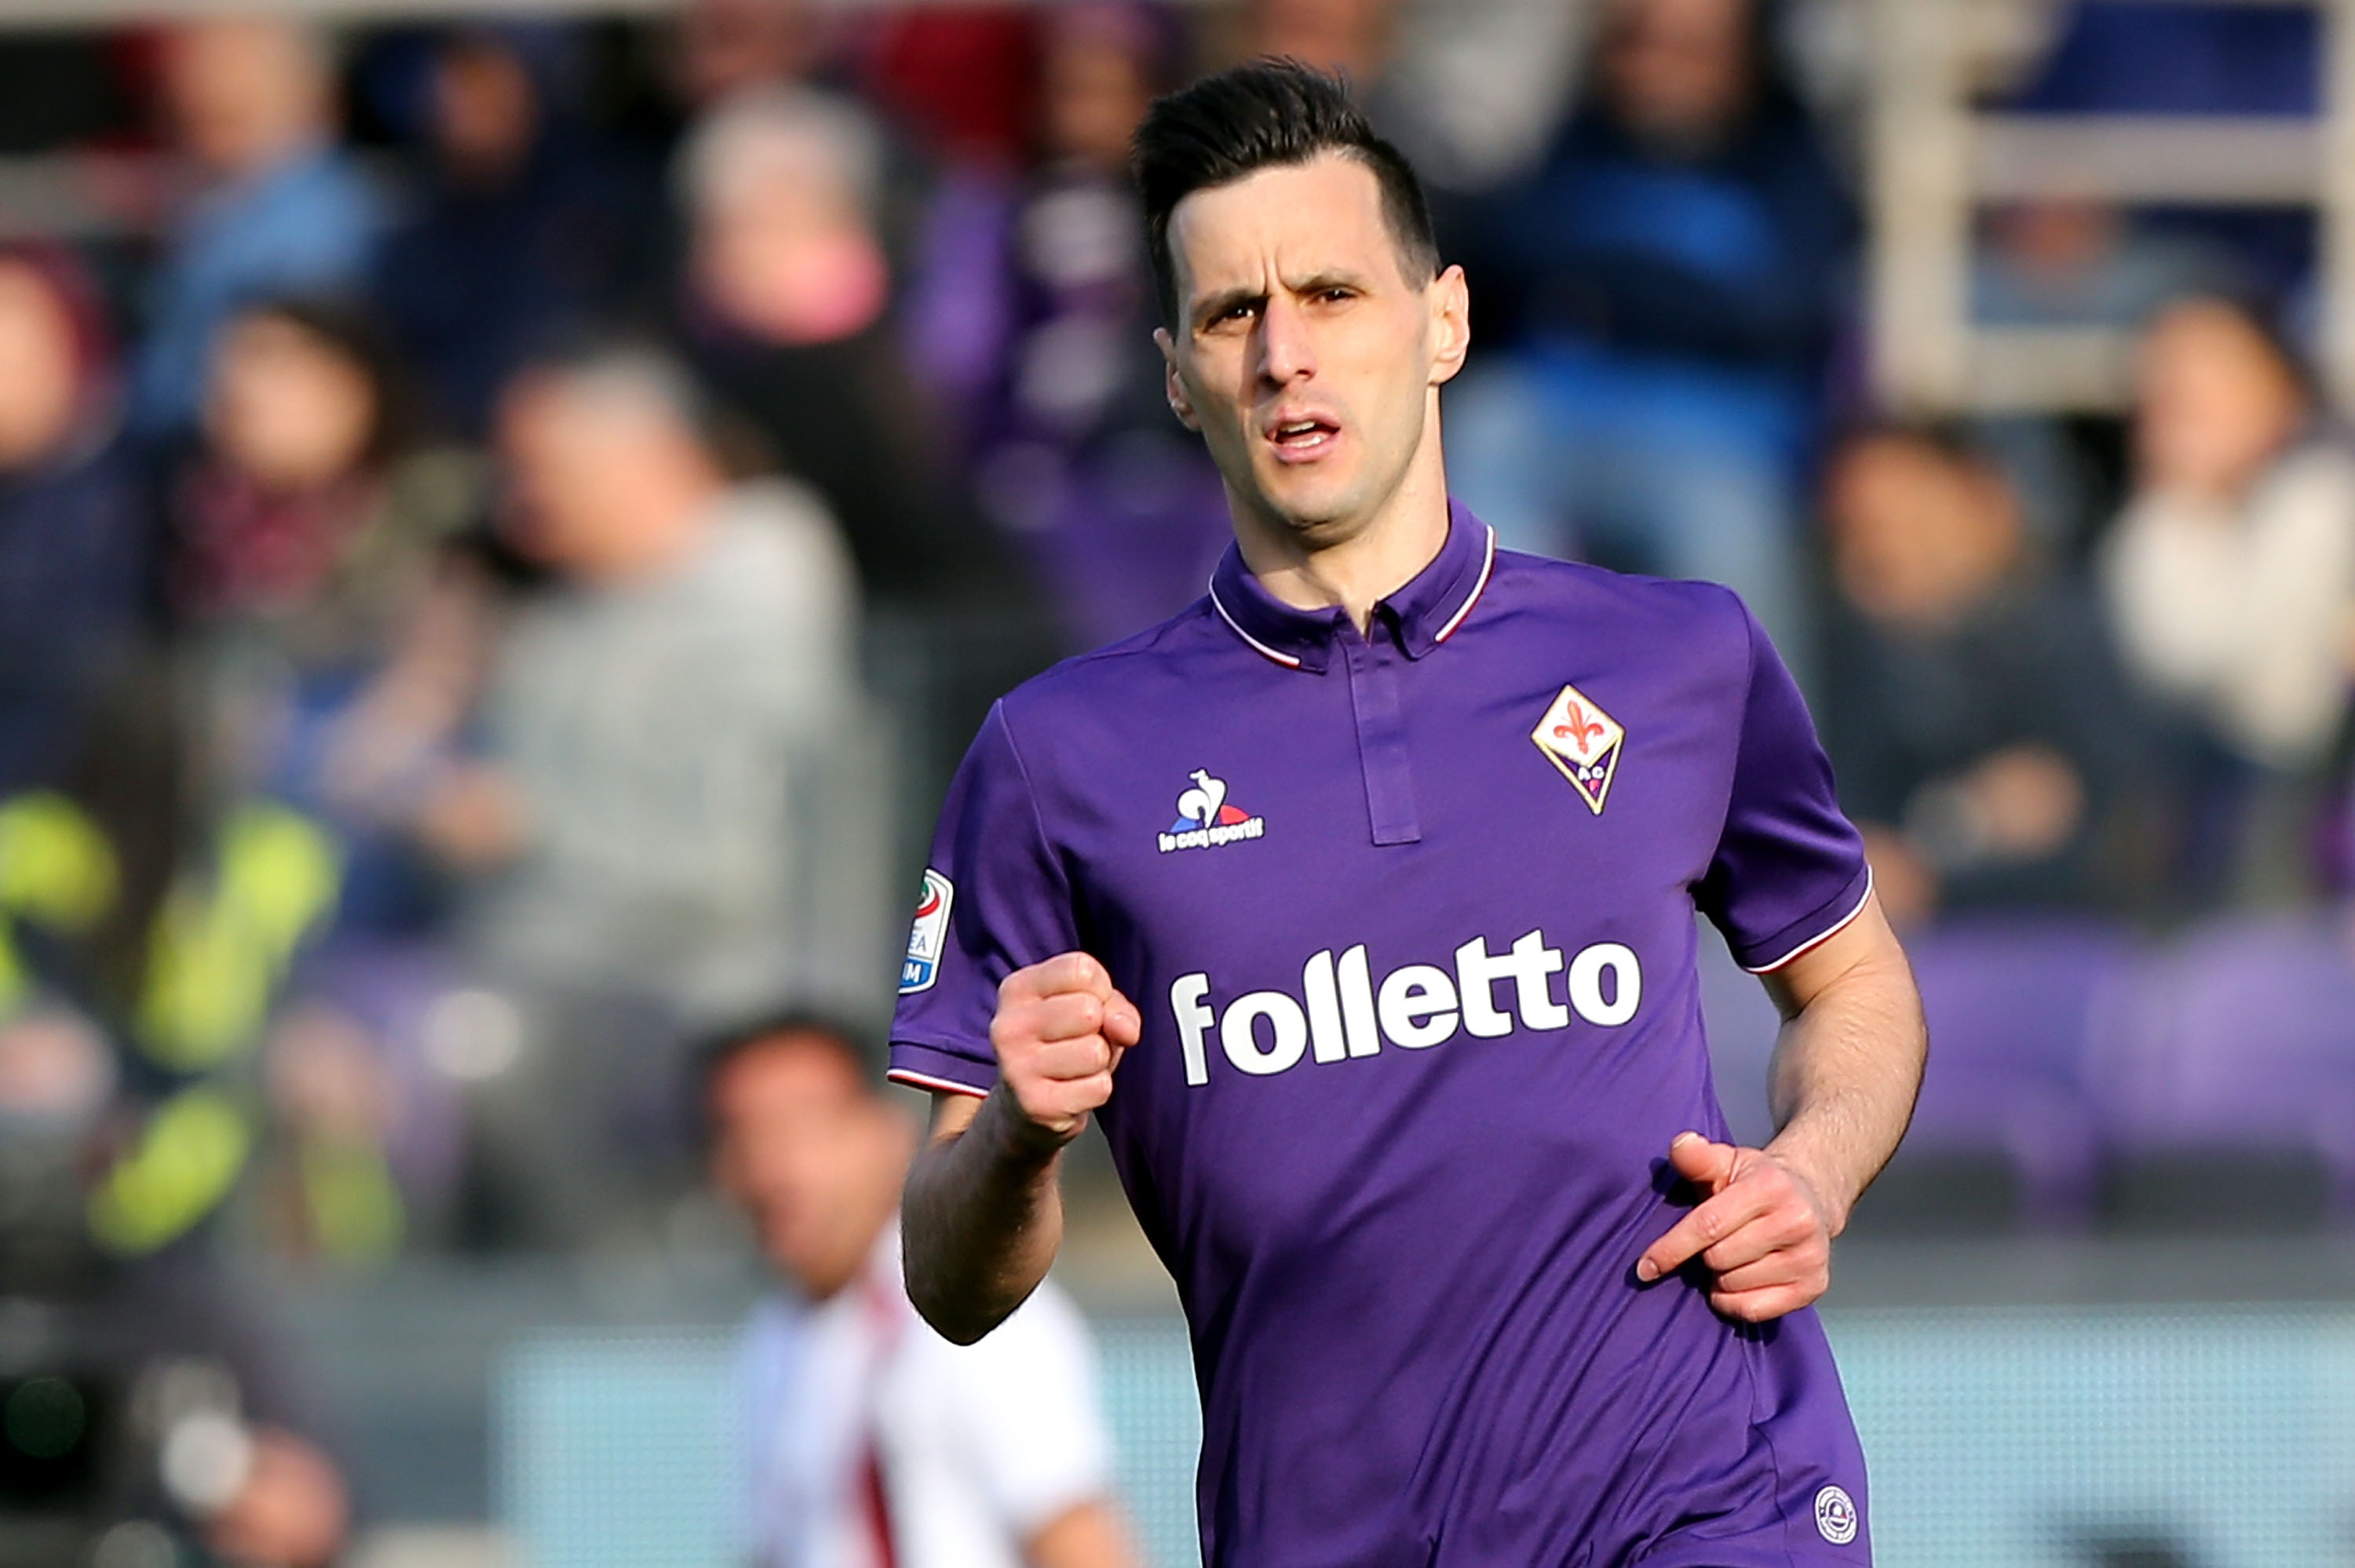 La Nazione – Kalinic-Jiangsu, only if he gets Inter move after